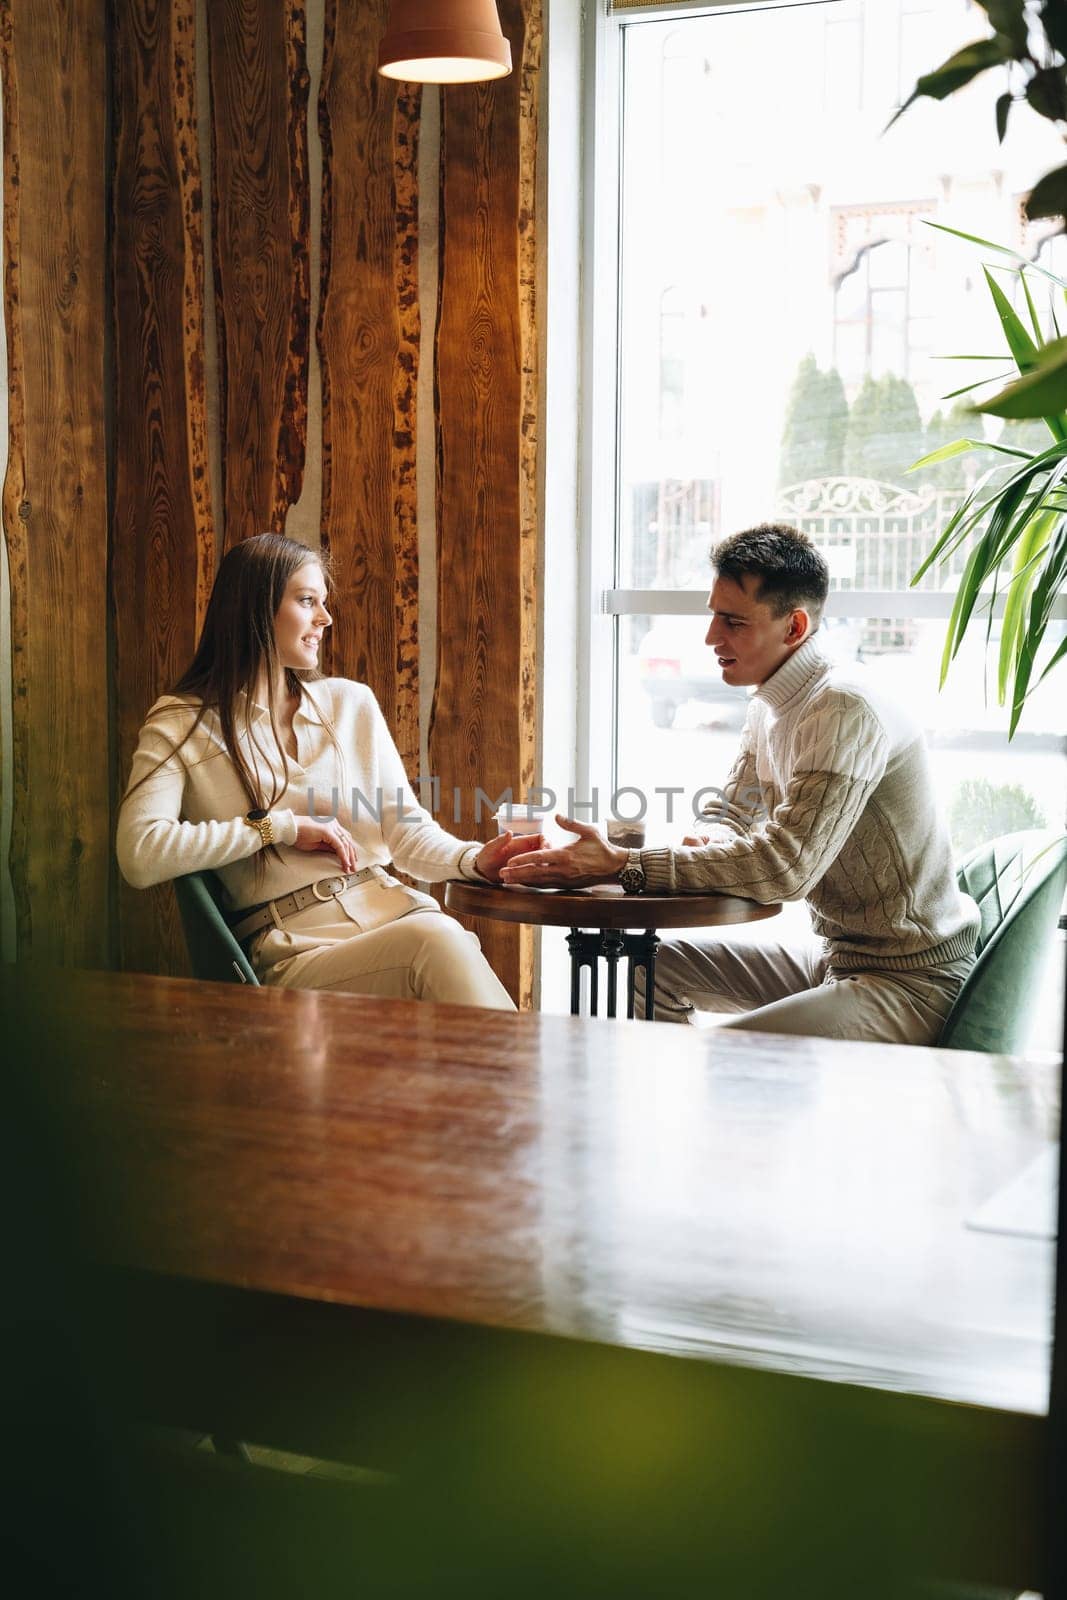 Two professionals are engaged in a conversation while sitting opposite each other at a wooden table in a cafe with natural light streaming in from a large window. They appear relaxed and focused, with cups of coffee in hand, surrounded by a warm, rustic interior.